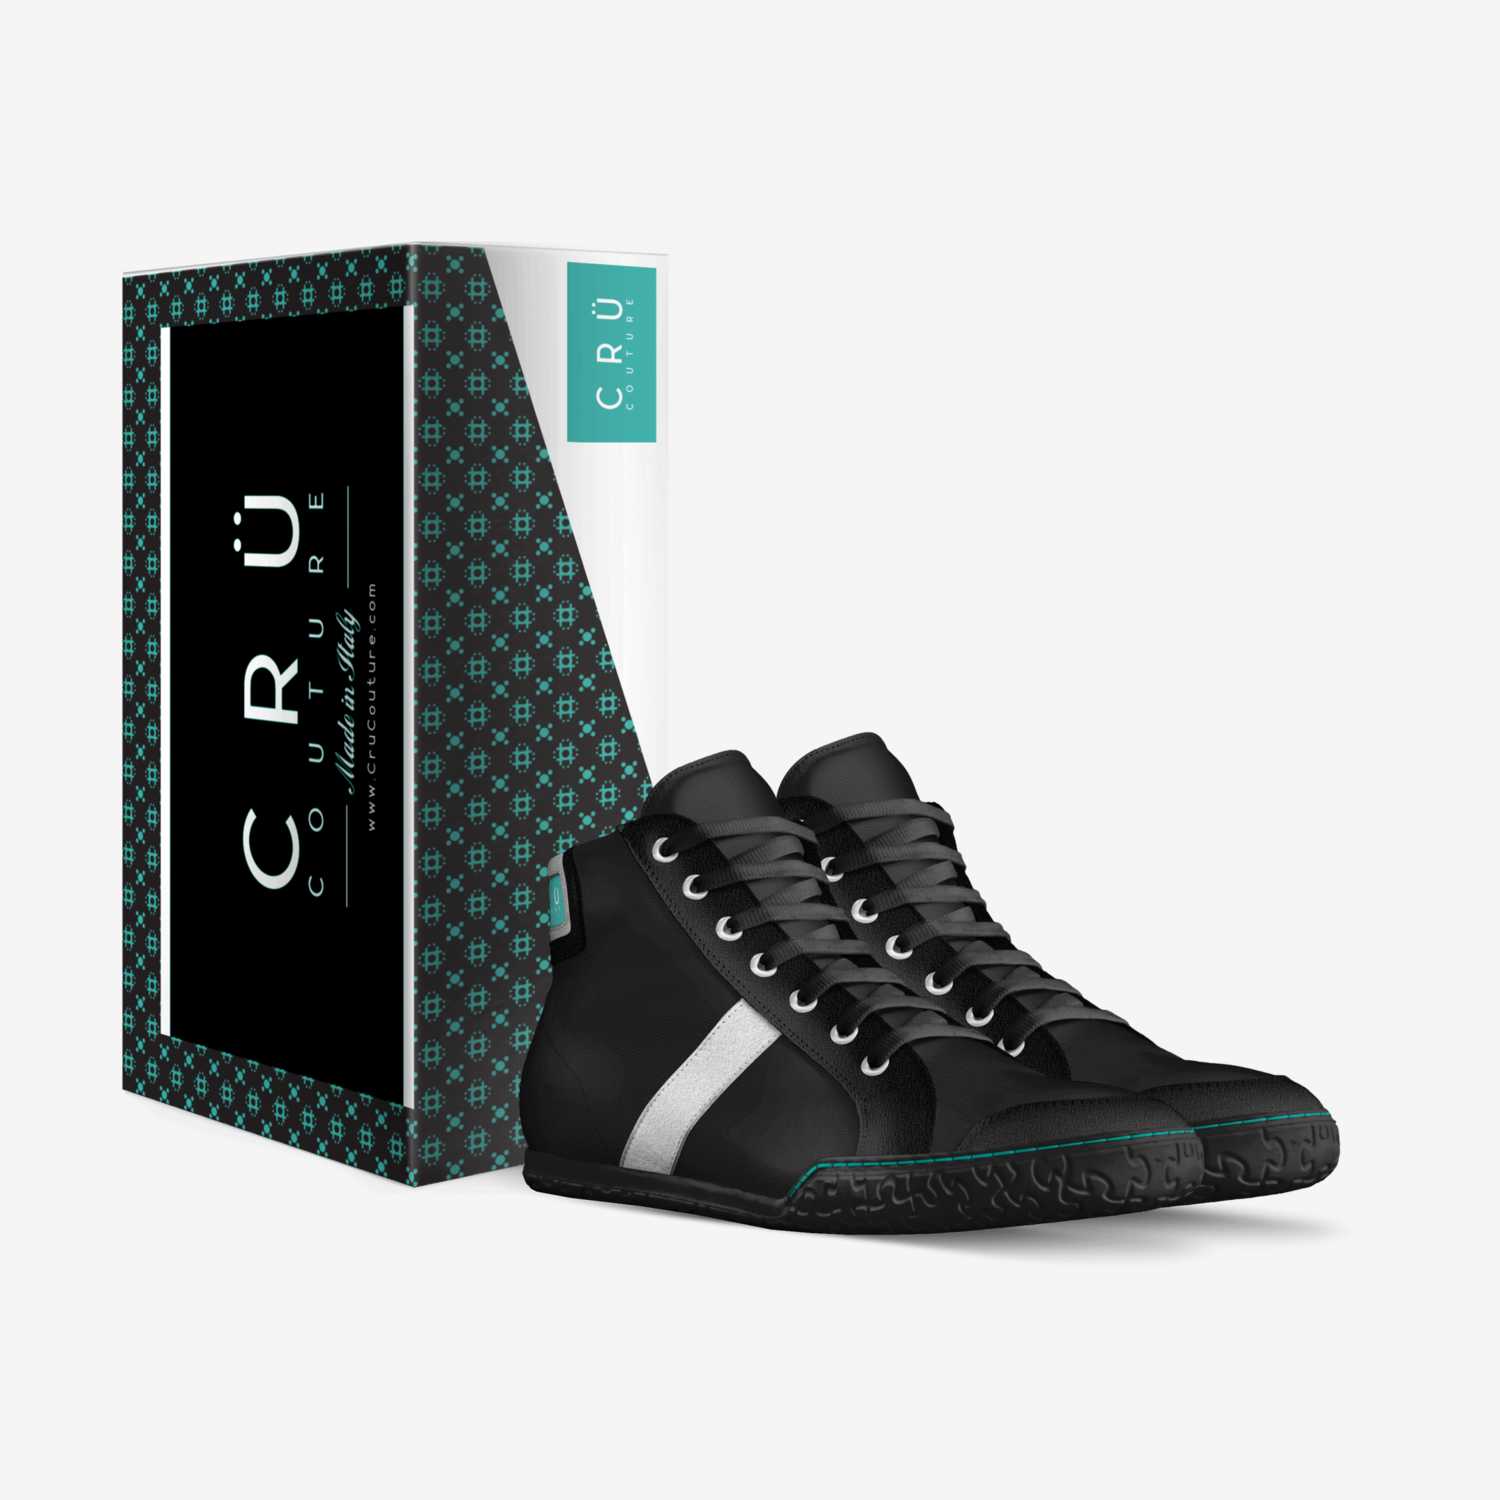 CRU 1X custom made in Italy shoes by Corey Guilbault | Box view